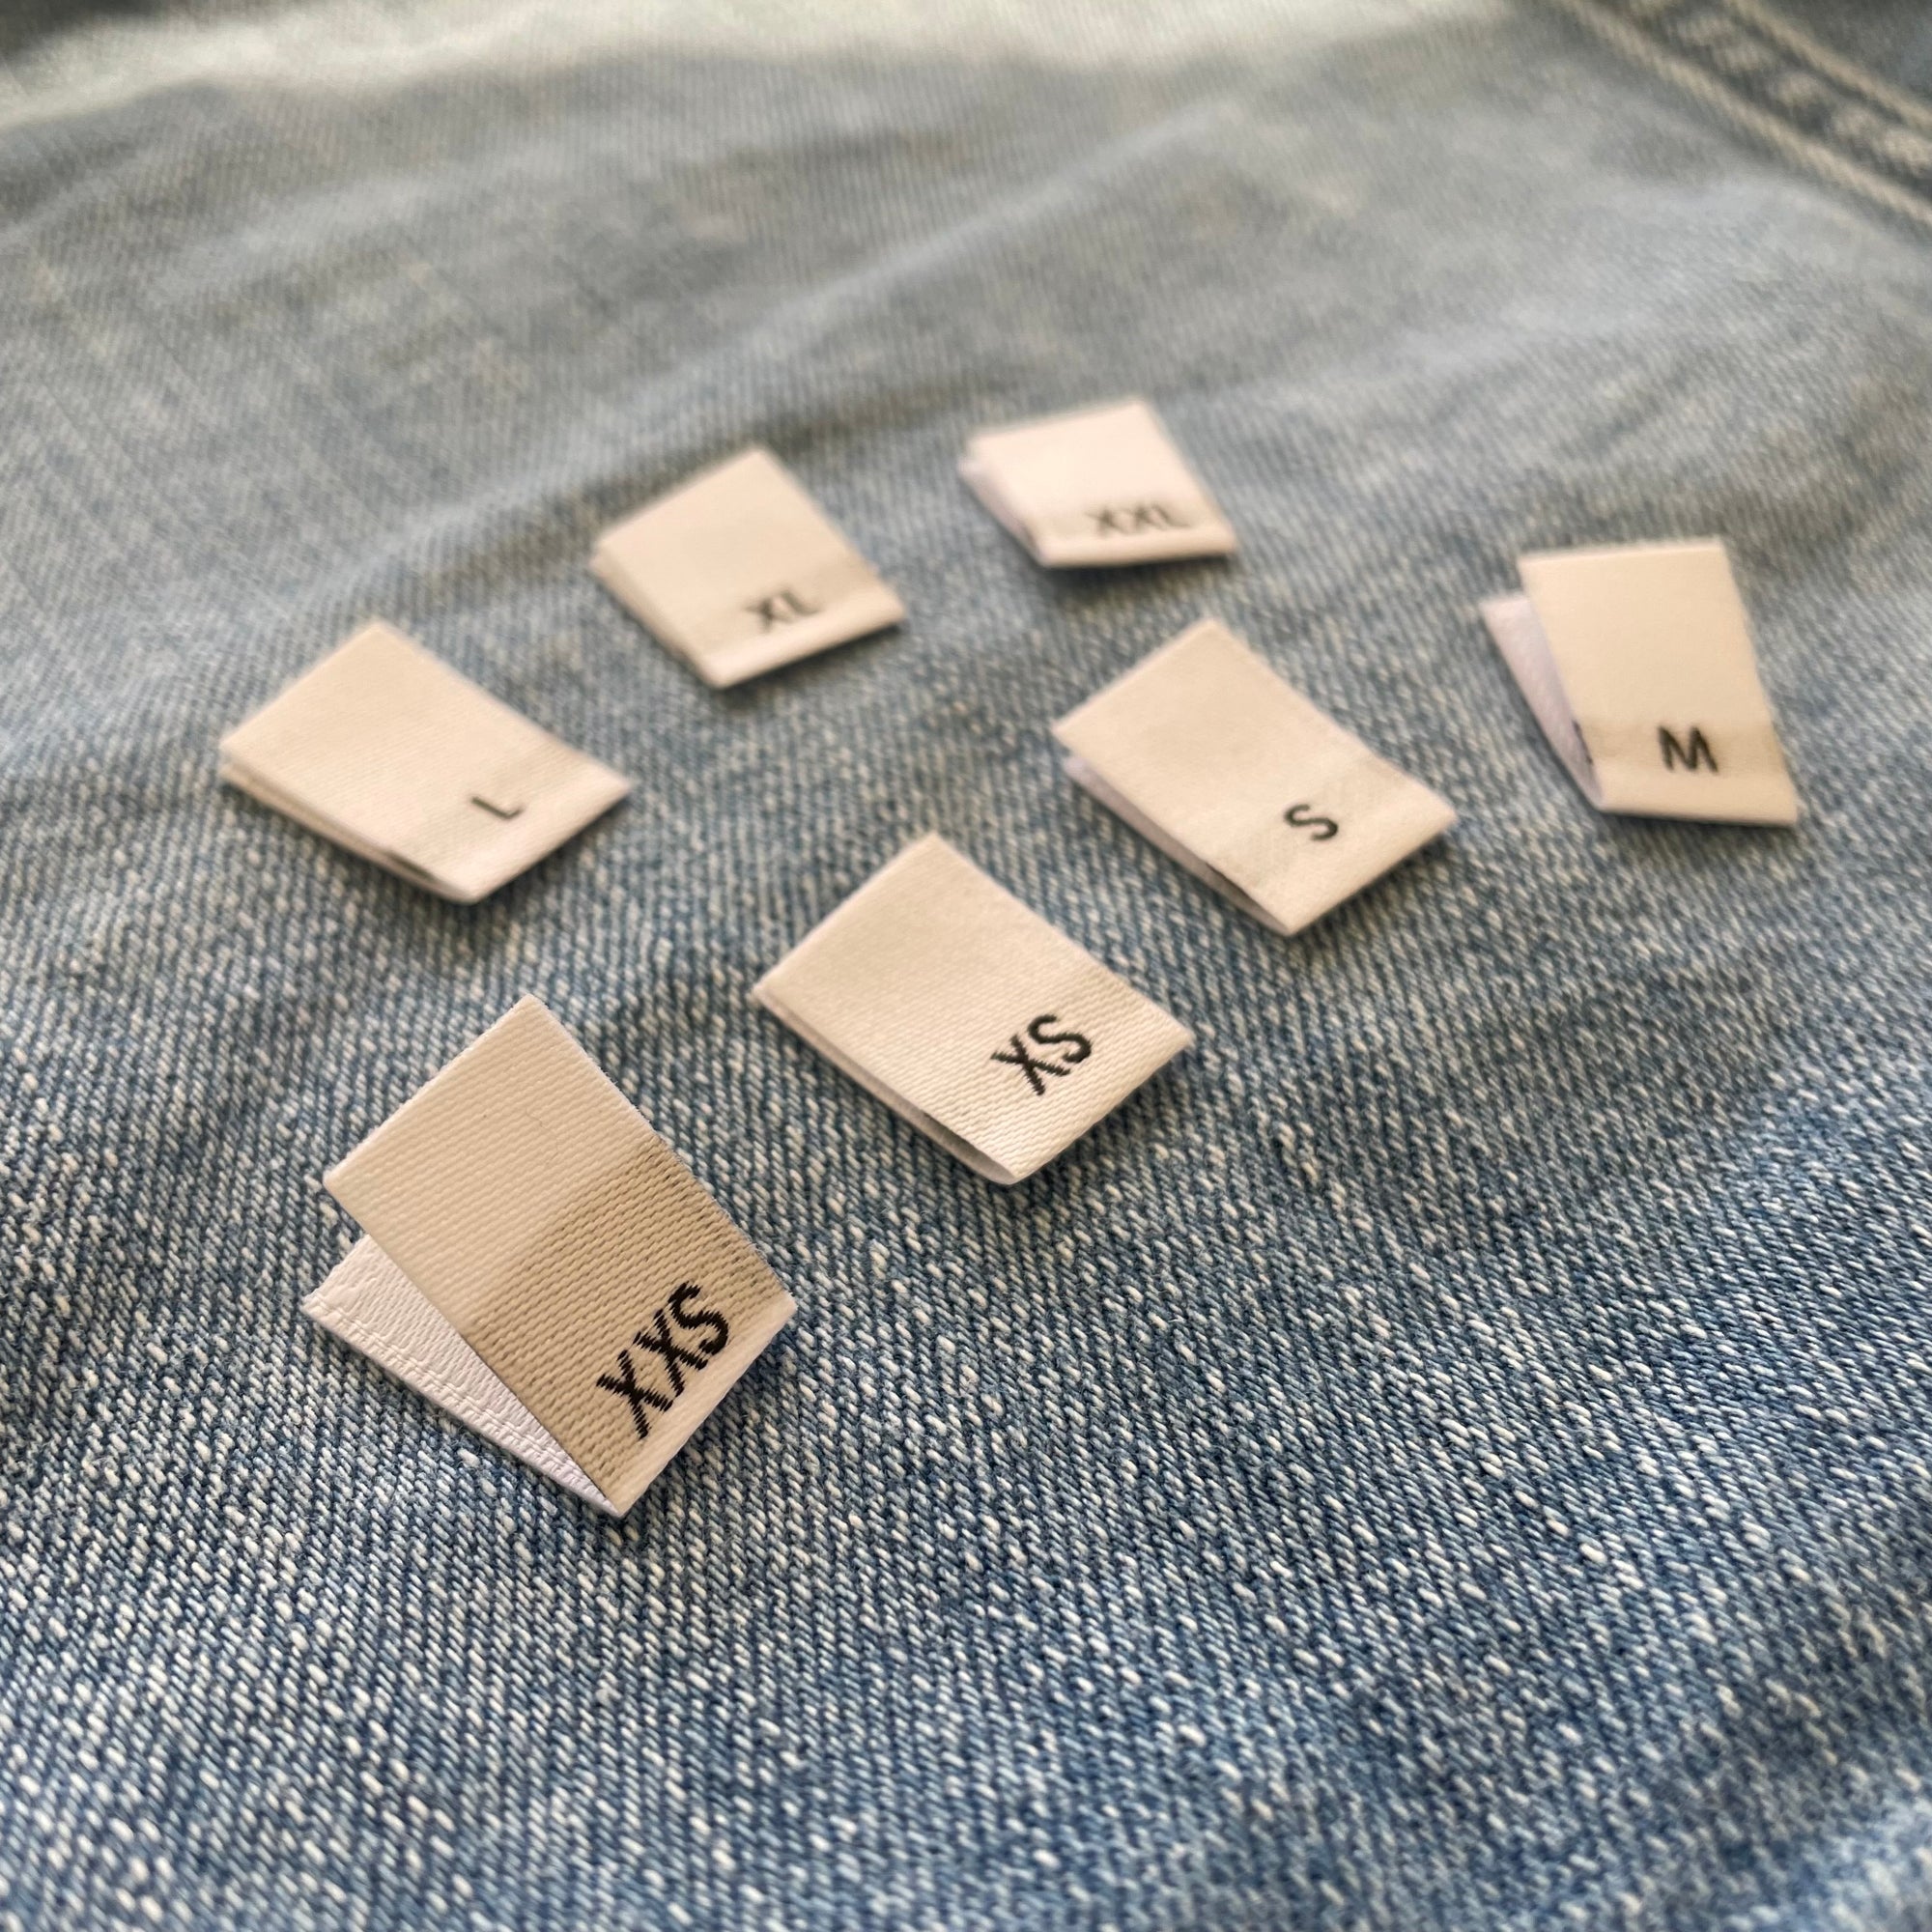  STOBOK 400 Pcs Clothing Size Buckle Size Labels for Clothing  Lables Washable Size Tags Size Tags for Clothing Fabric Labels for Clothes  Garment Size Tags Button Plastic White Round 